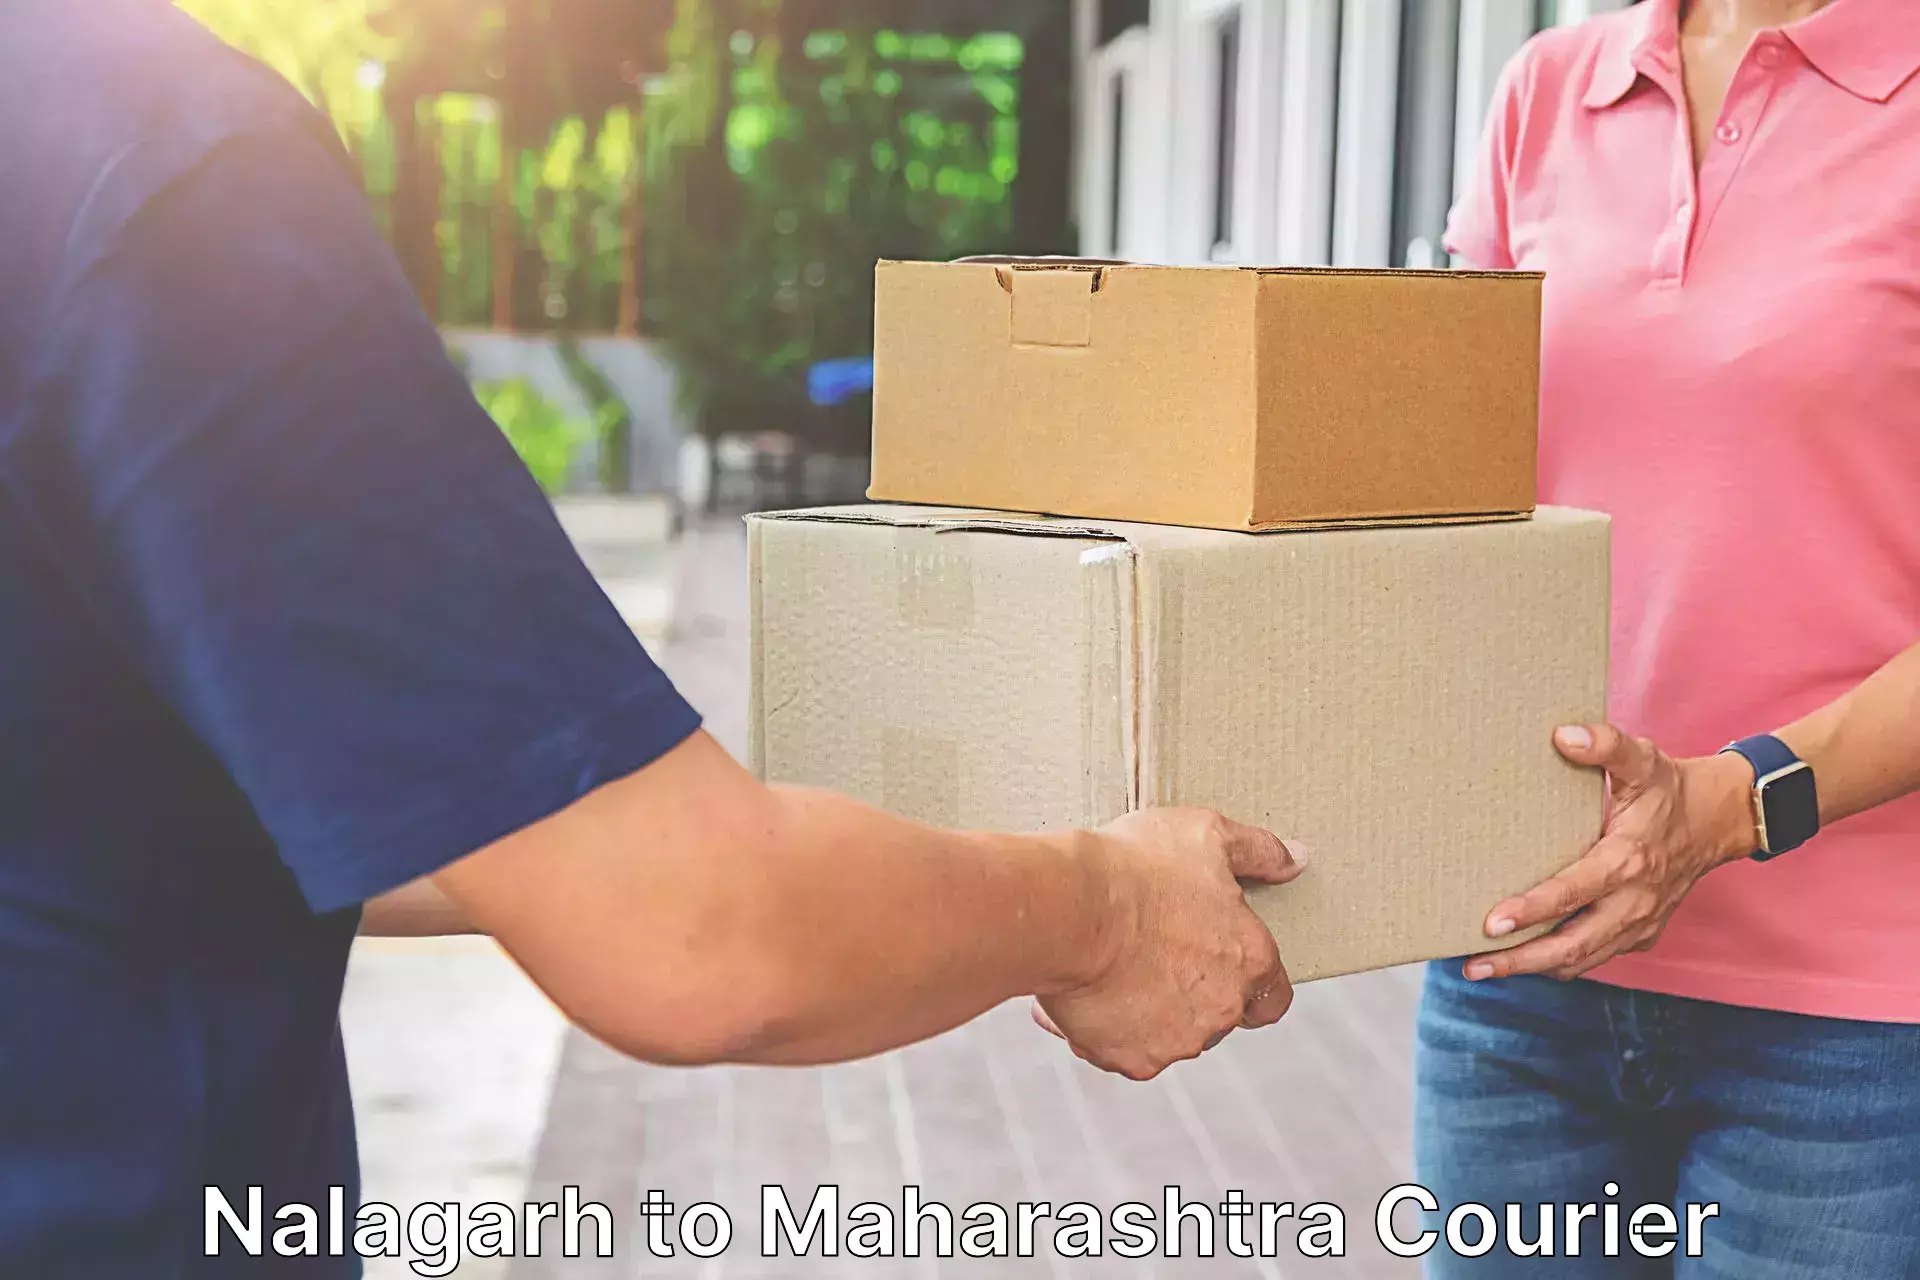 Flexible delivery schedules Nalagarh to Symbiosis International Pune